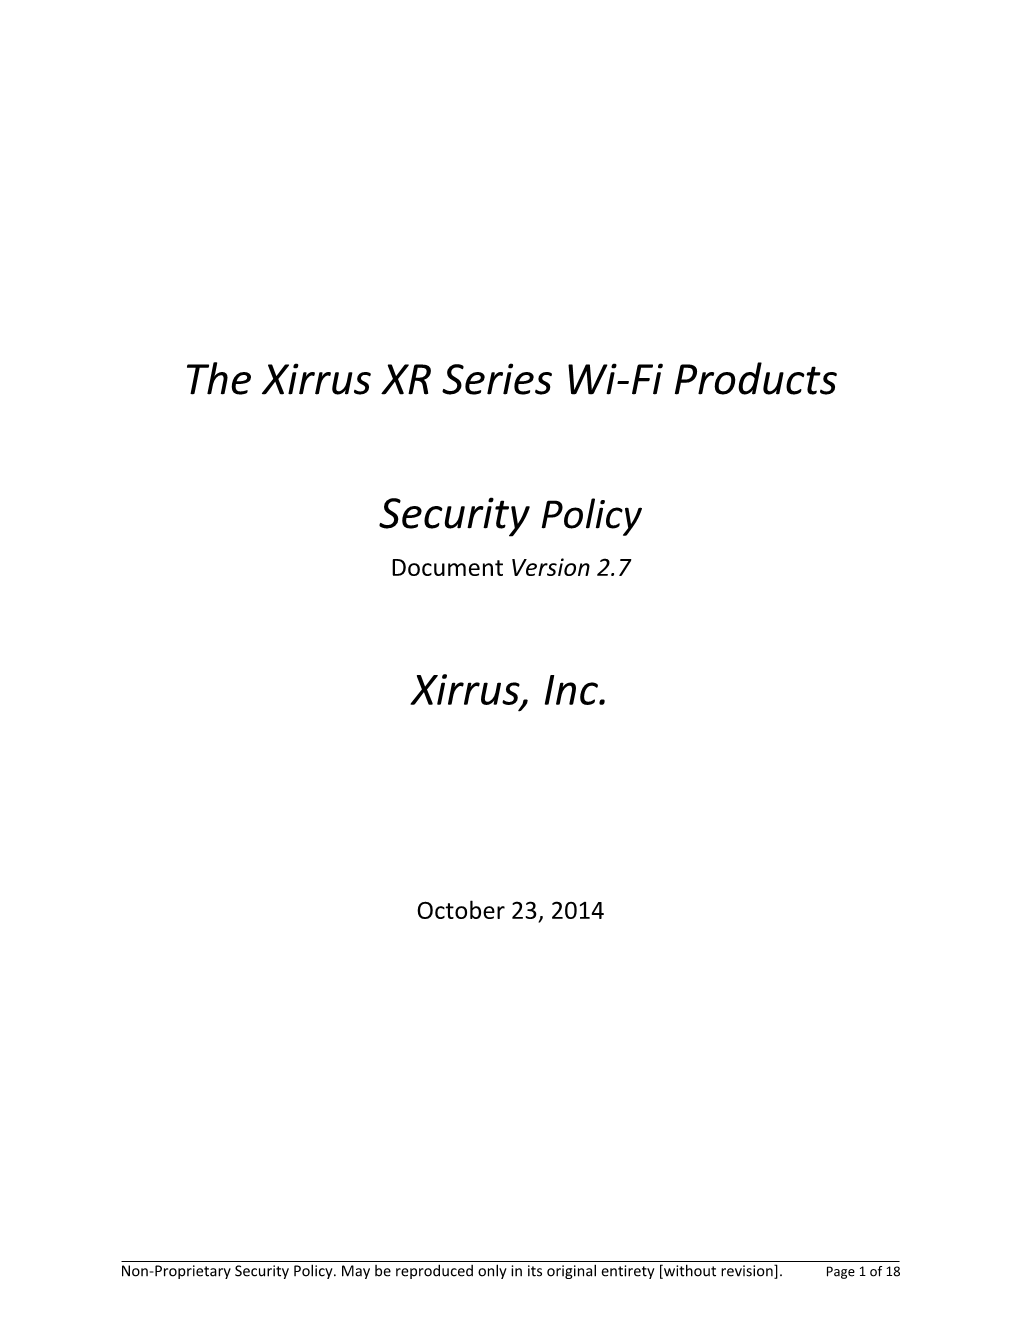 The Xirrus XR Series Wi-Fi Products Security Policy Xirrus, Inc